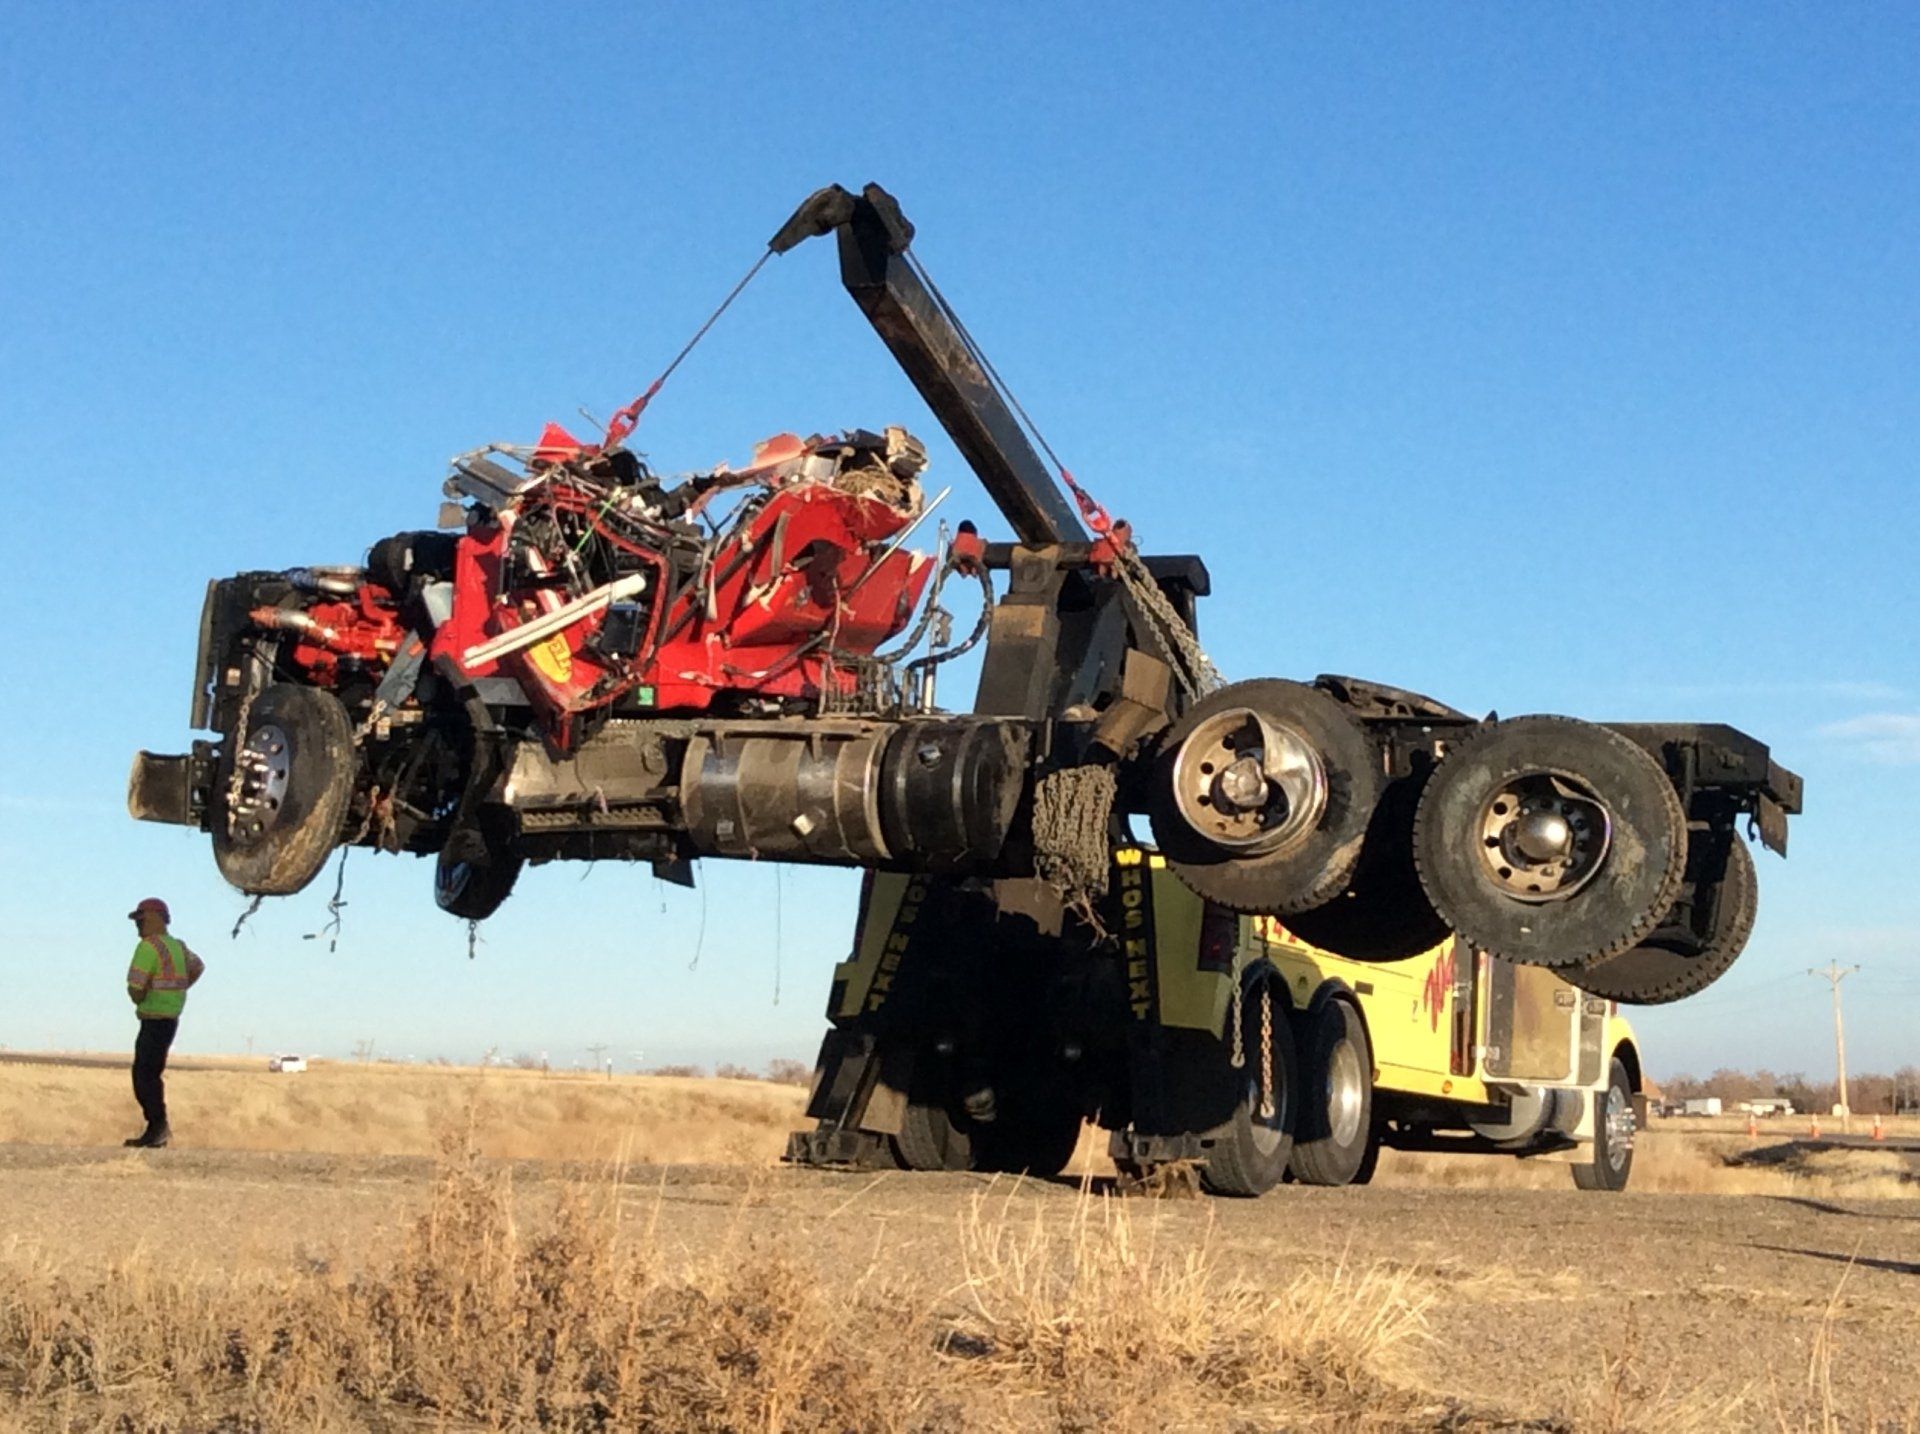 Diesel Truck Wrecked - Hauling and Towing Services in Pueblo,CO and the Surrounding Area